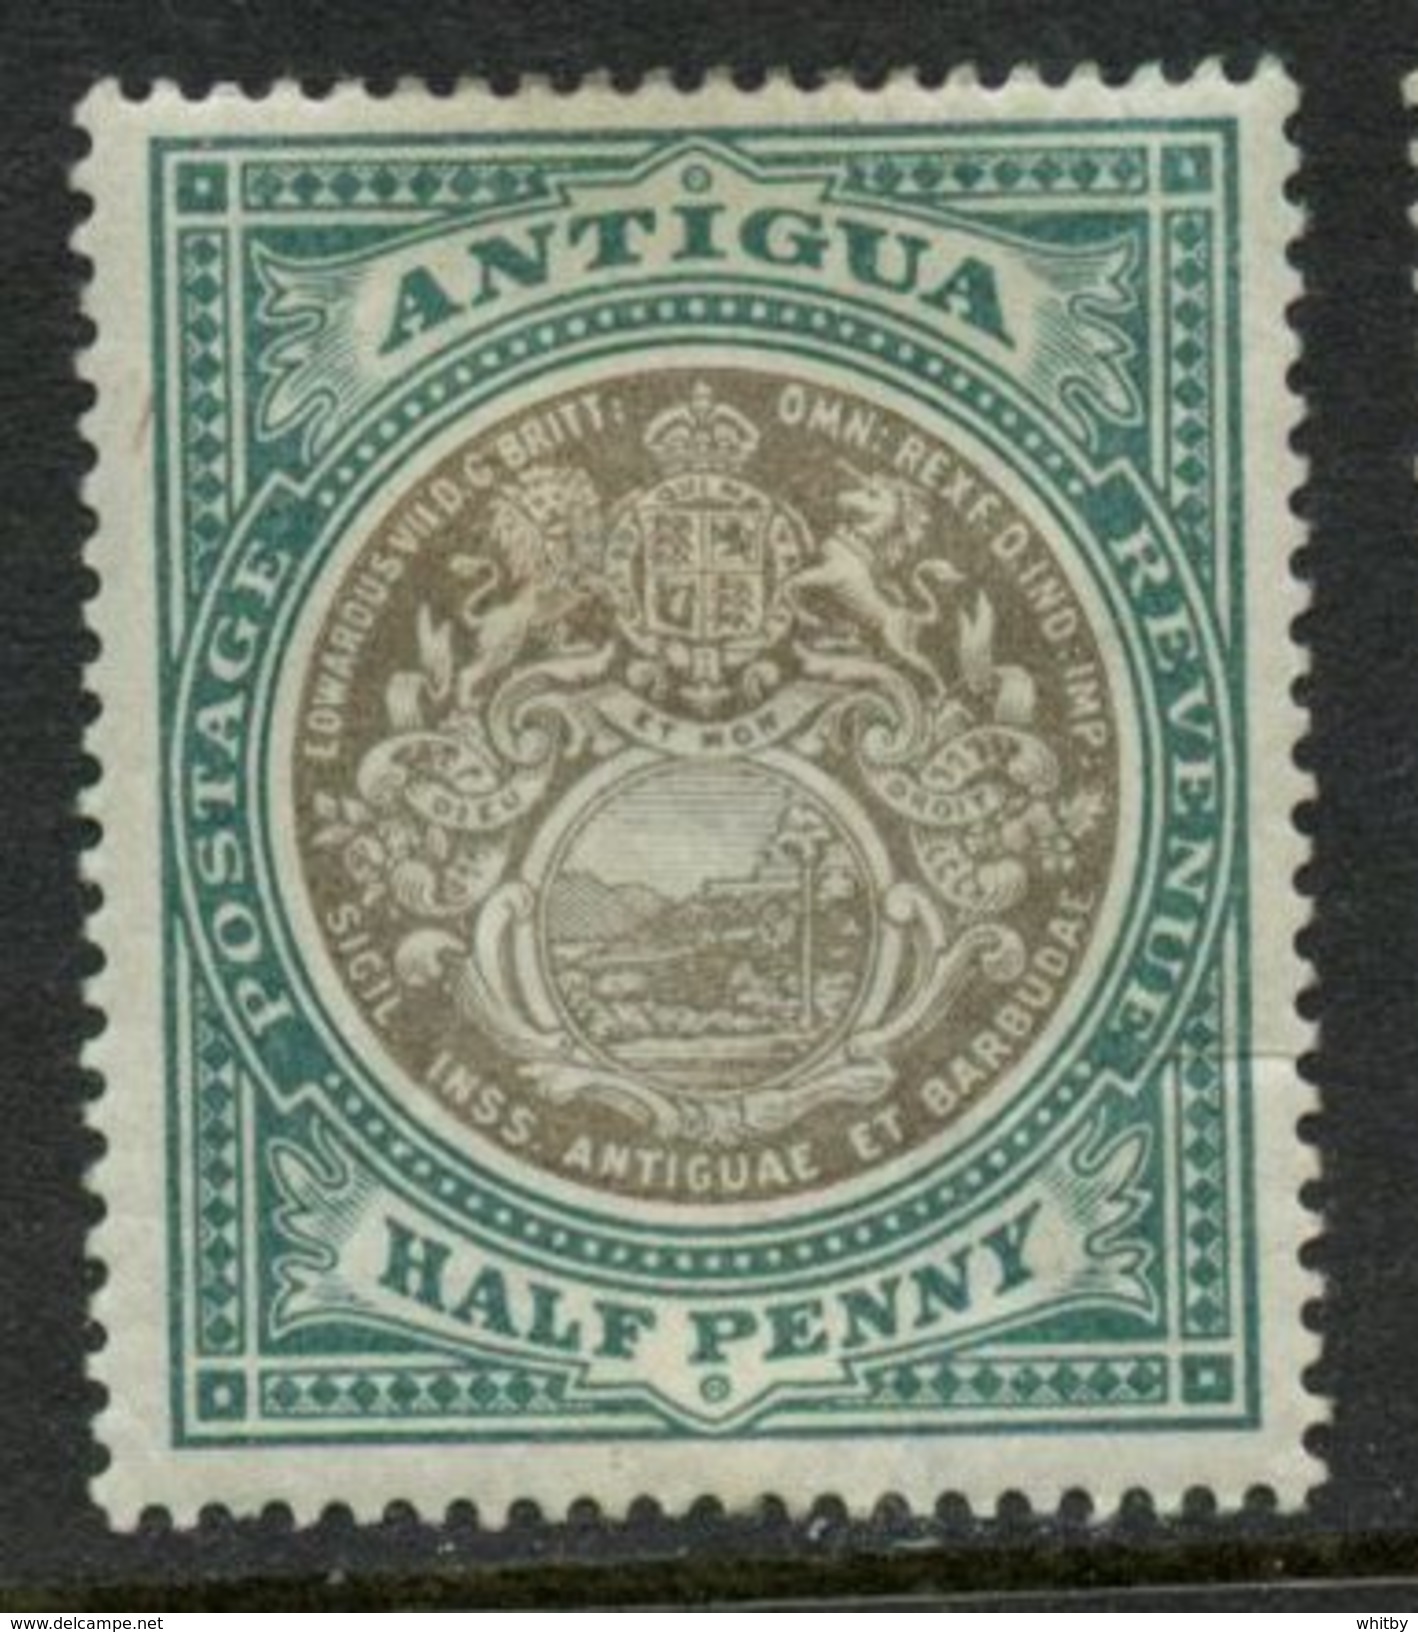 Antigua  1903 1/2p Seal Issue #21  MH  Thinned - 1858-1960 Crown Colony